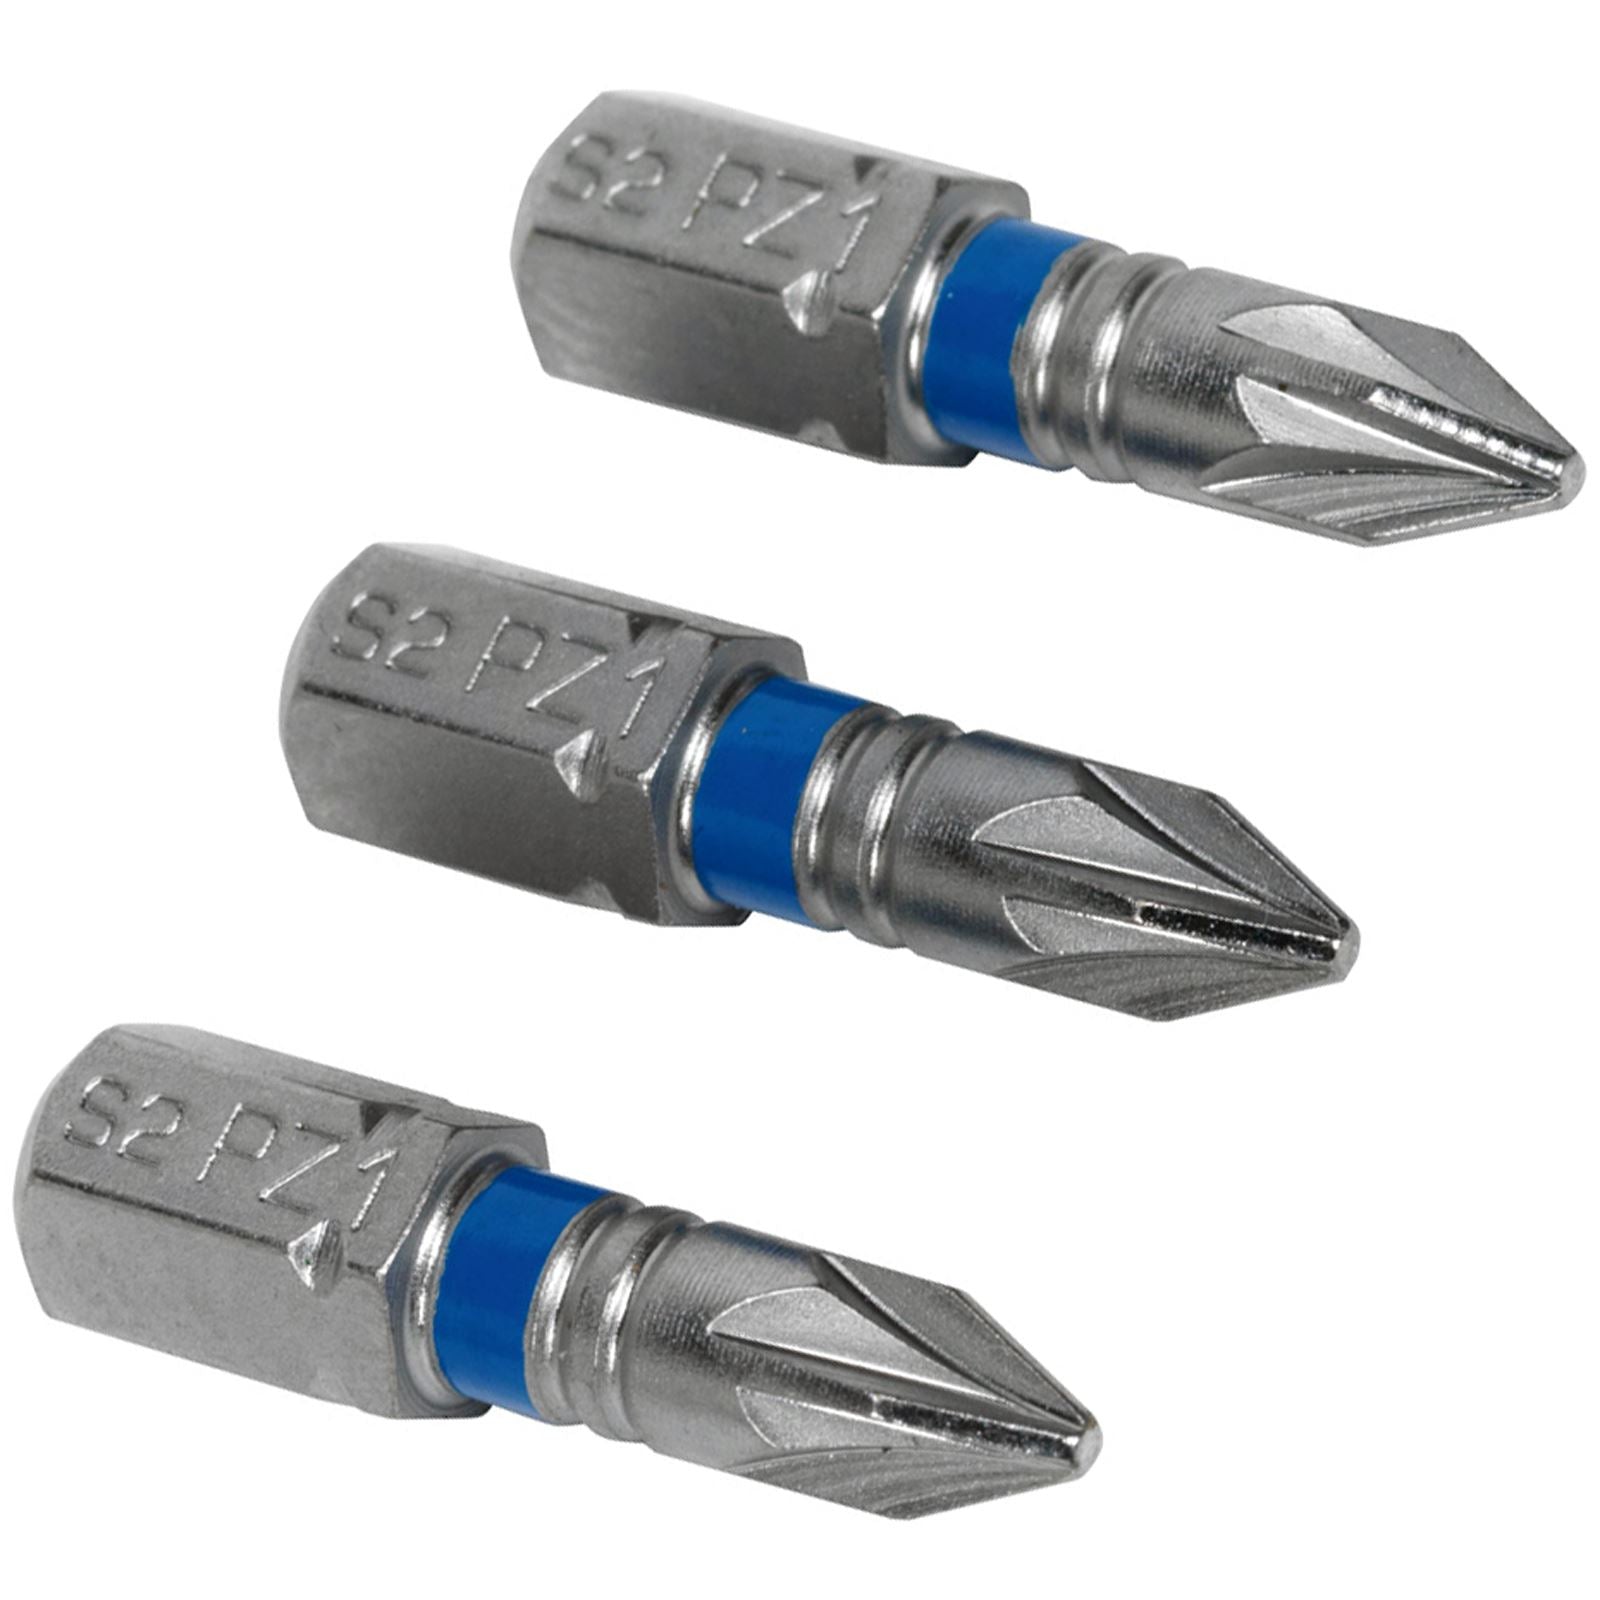 Sealey Screwdriver Bits Colour Coded S2 Steel 3 Pack Pozi Phillips Slotted 25mm 75mm